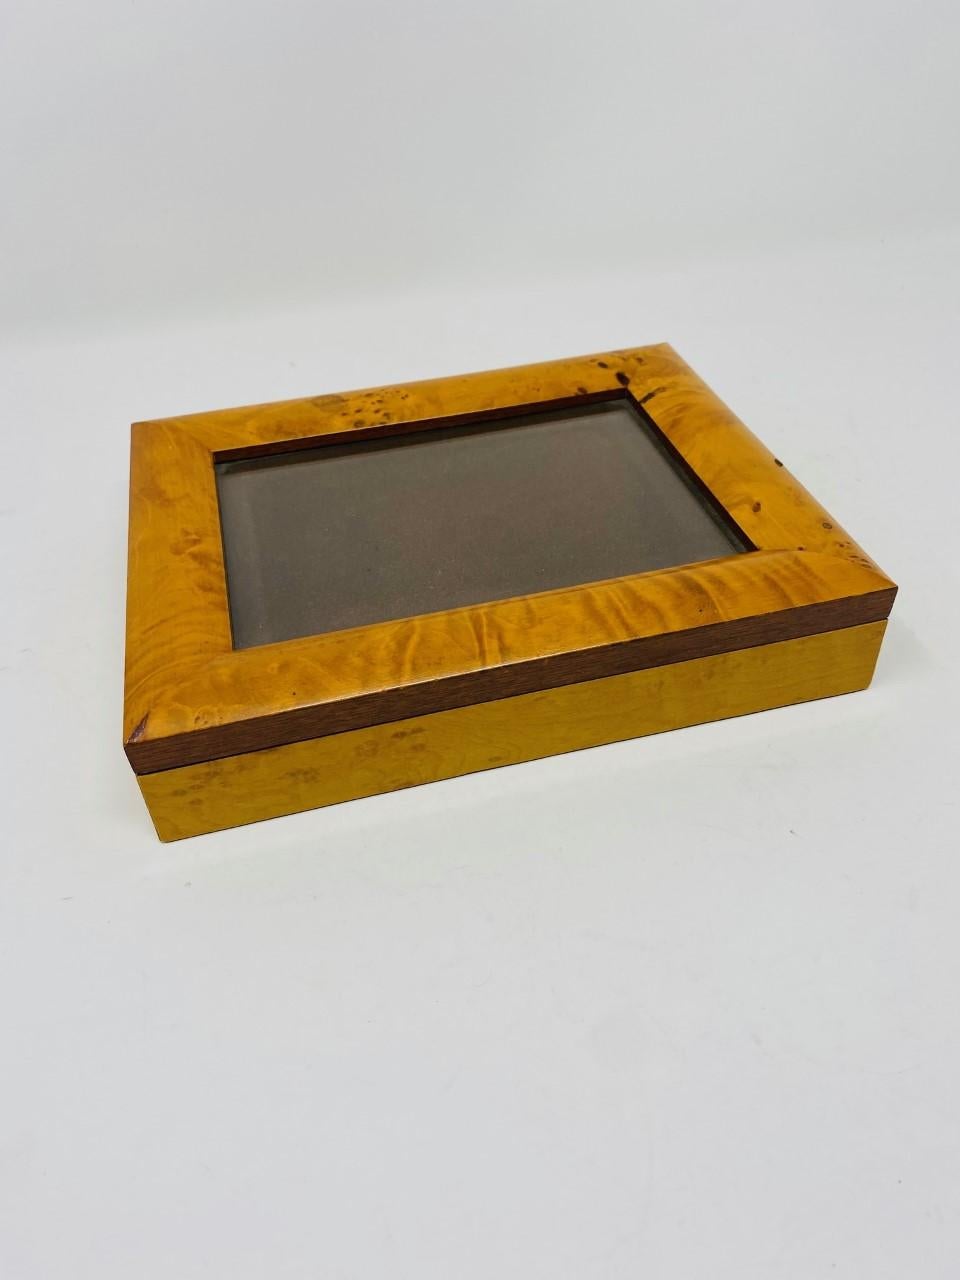 Wood Vintage French Marquetery Inlay Photo Frame Box 1970s For Sale